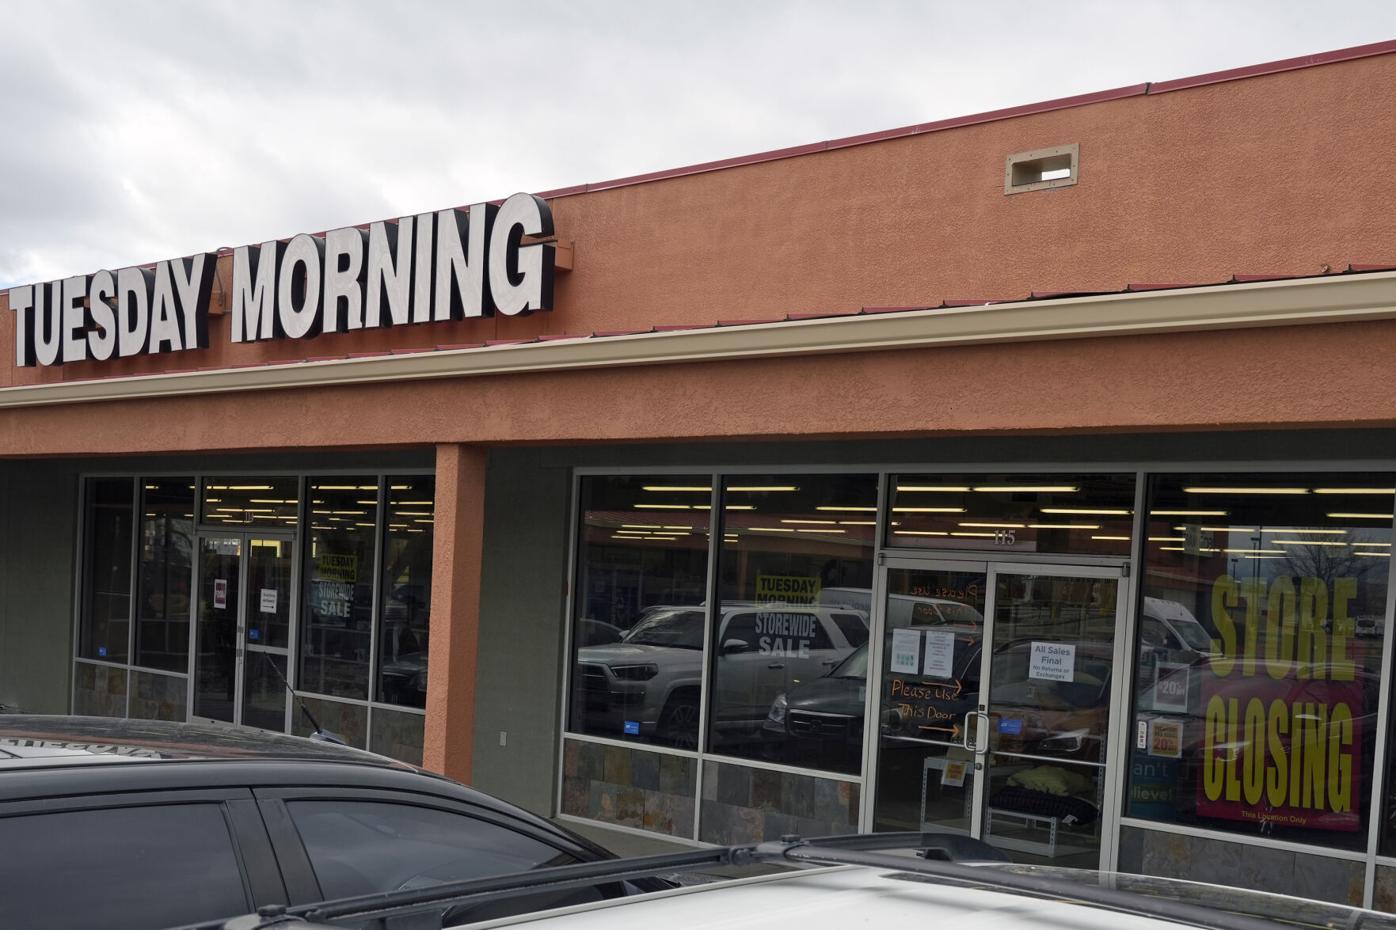 Tuesday Morning store in Grand Junction to close, Western Colorado